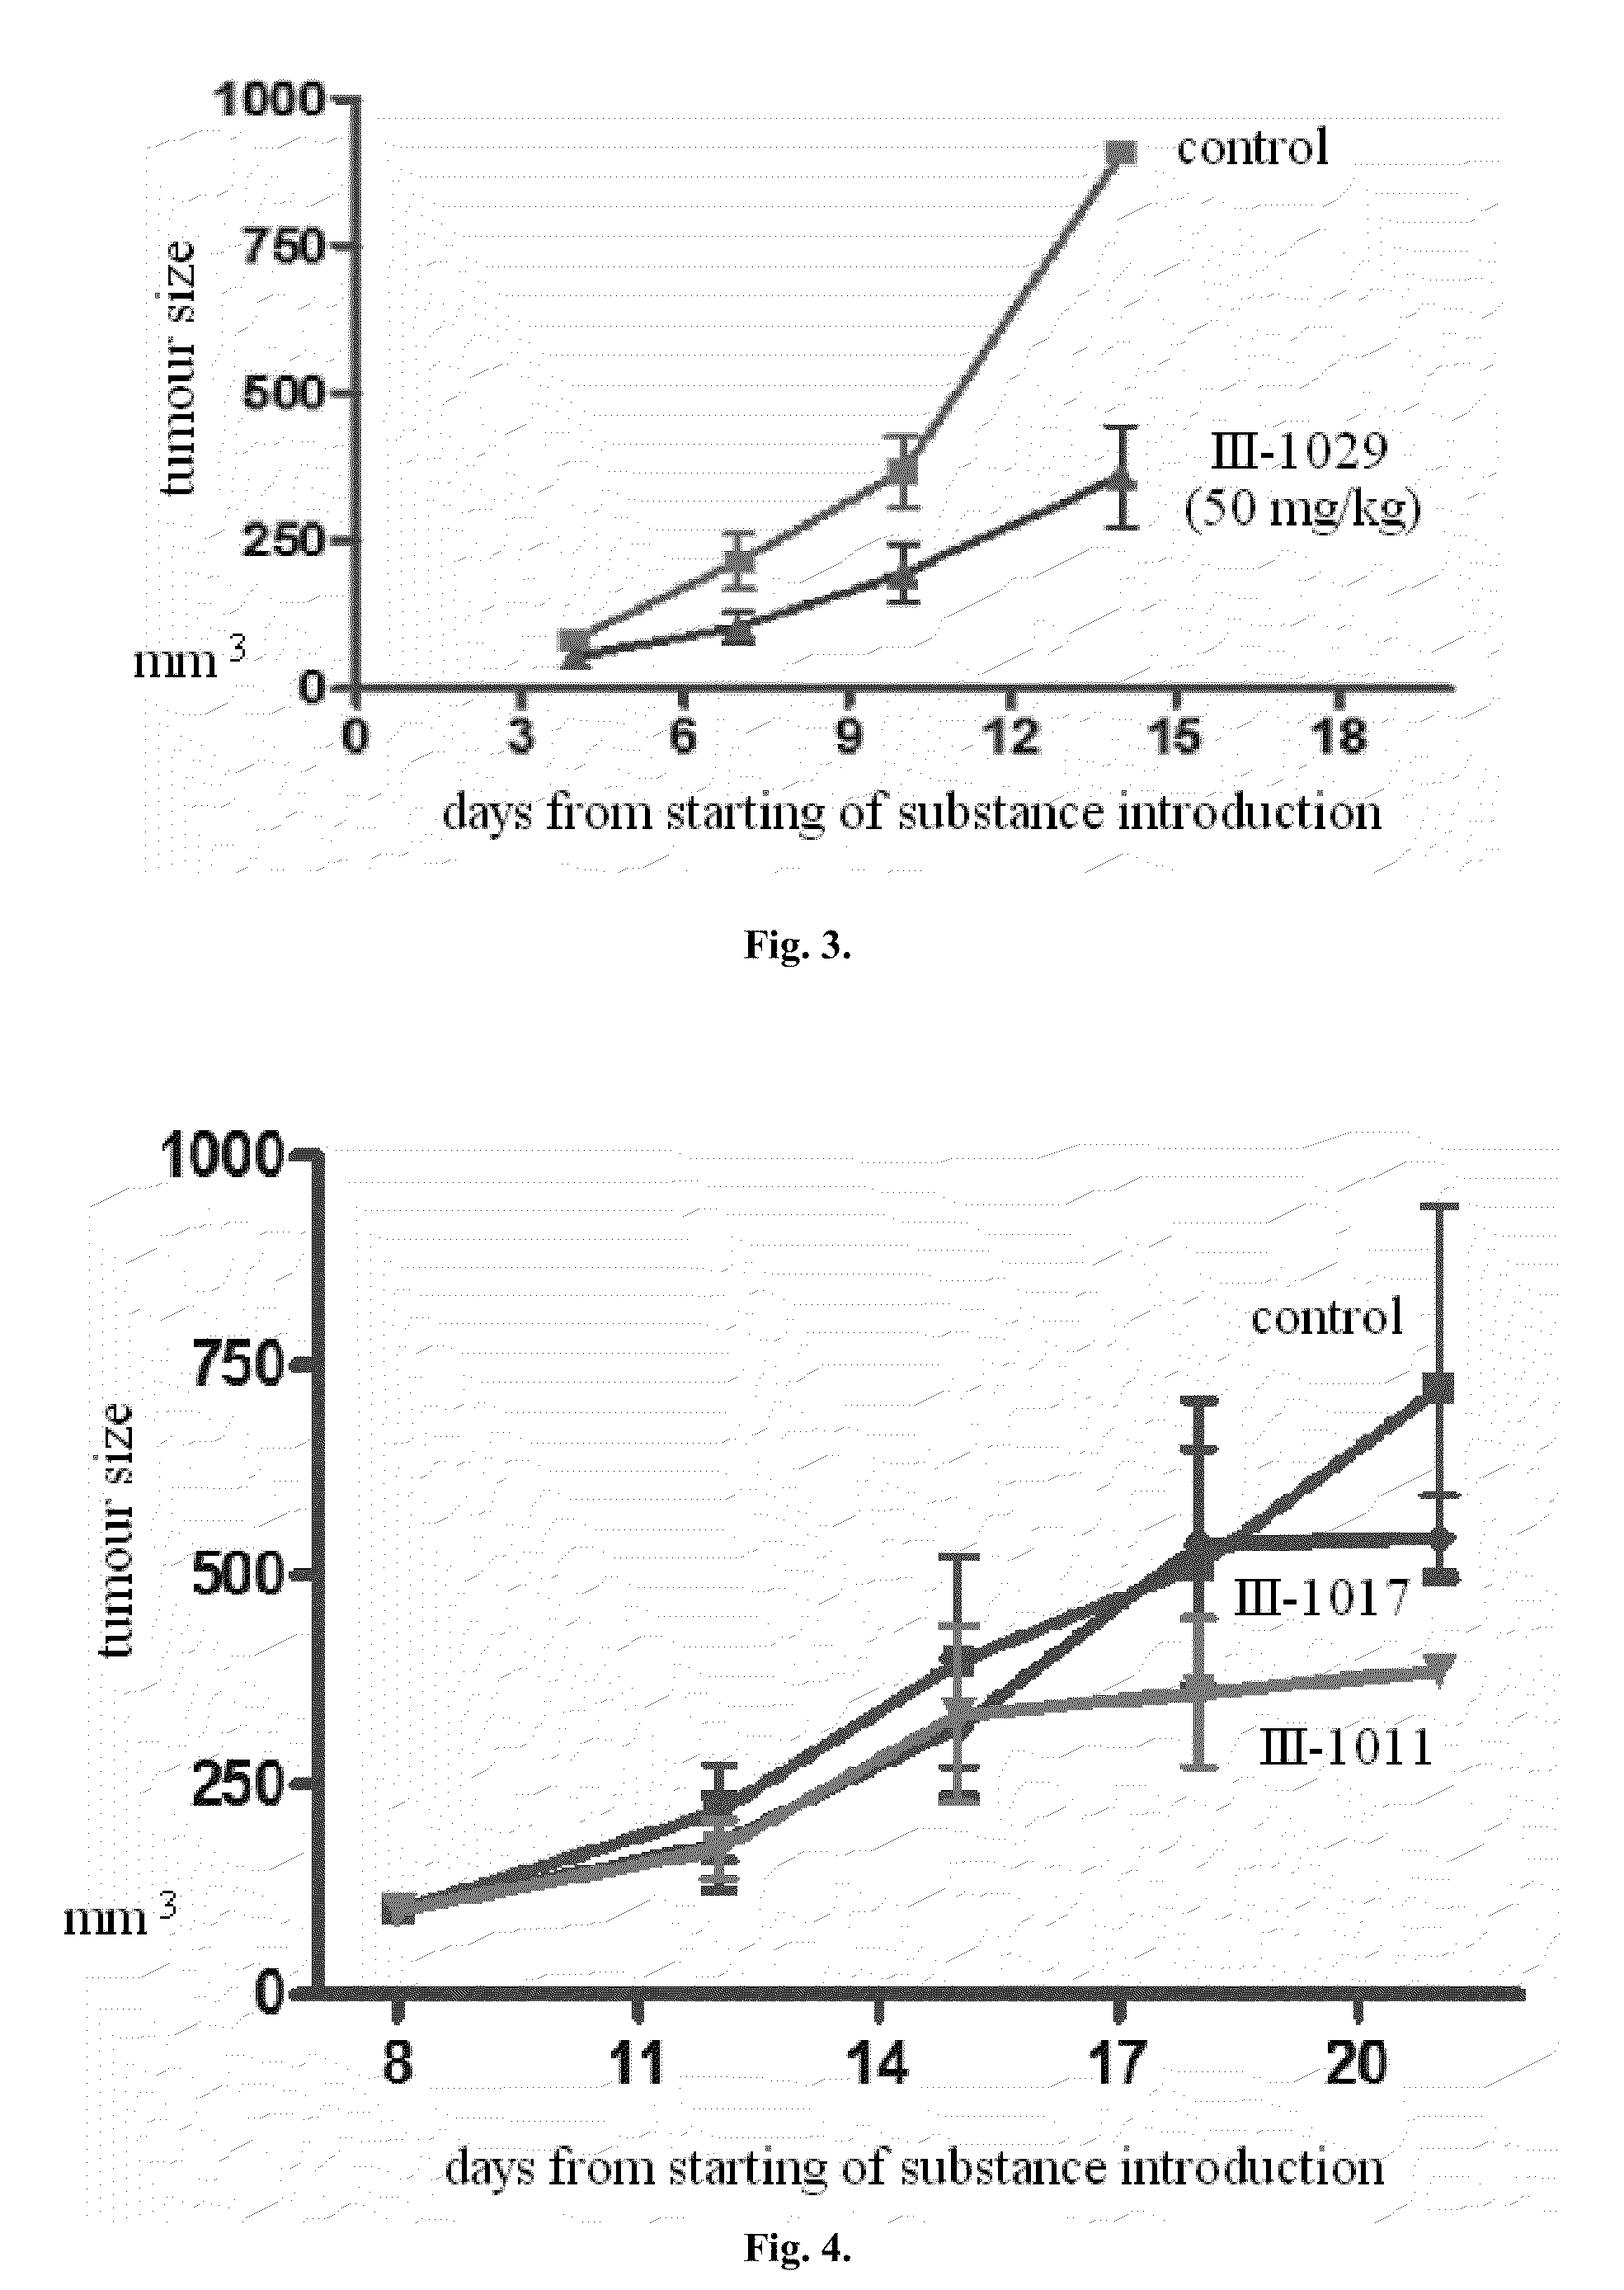 Heterocyclic inhibitors of an Hh-signal cascade, medicinal compositions based thereon and methods for treating diseases caused by the aberrant activity of an Hh-signal system